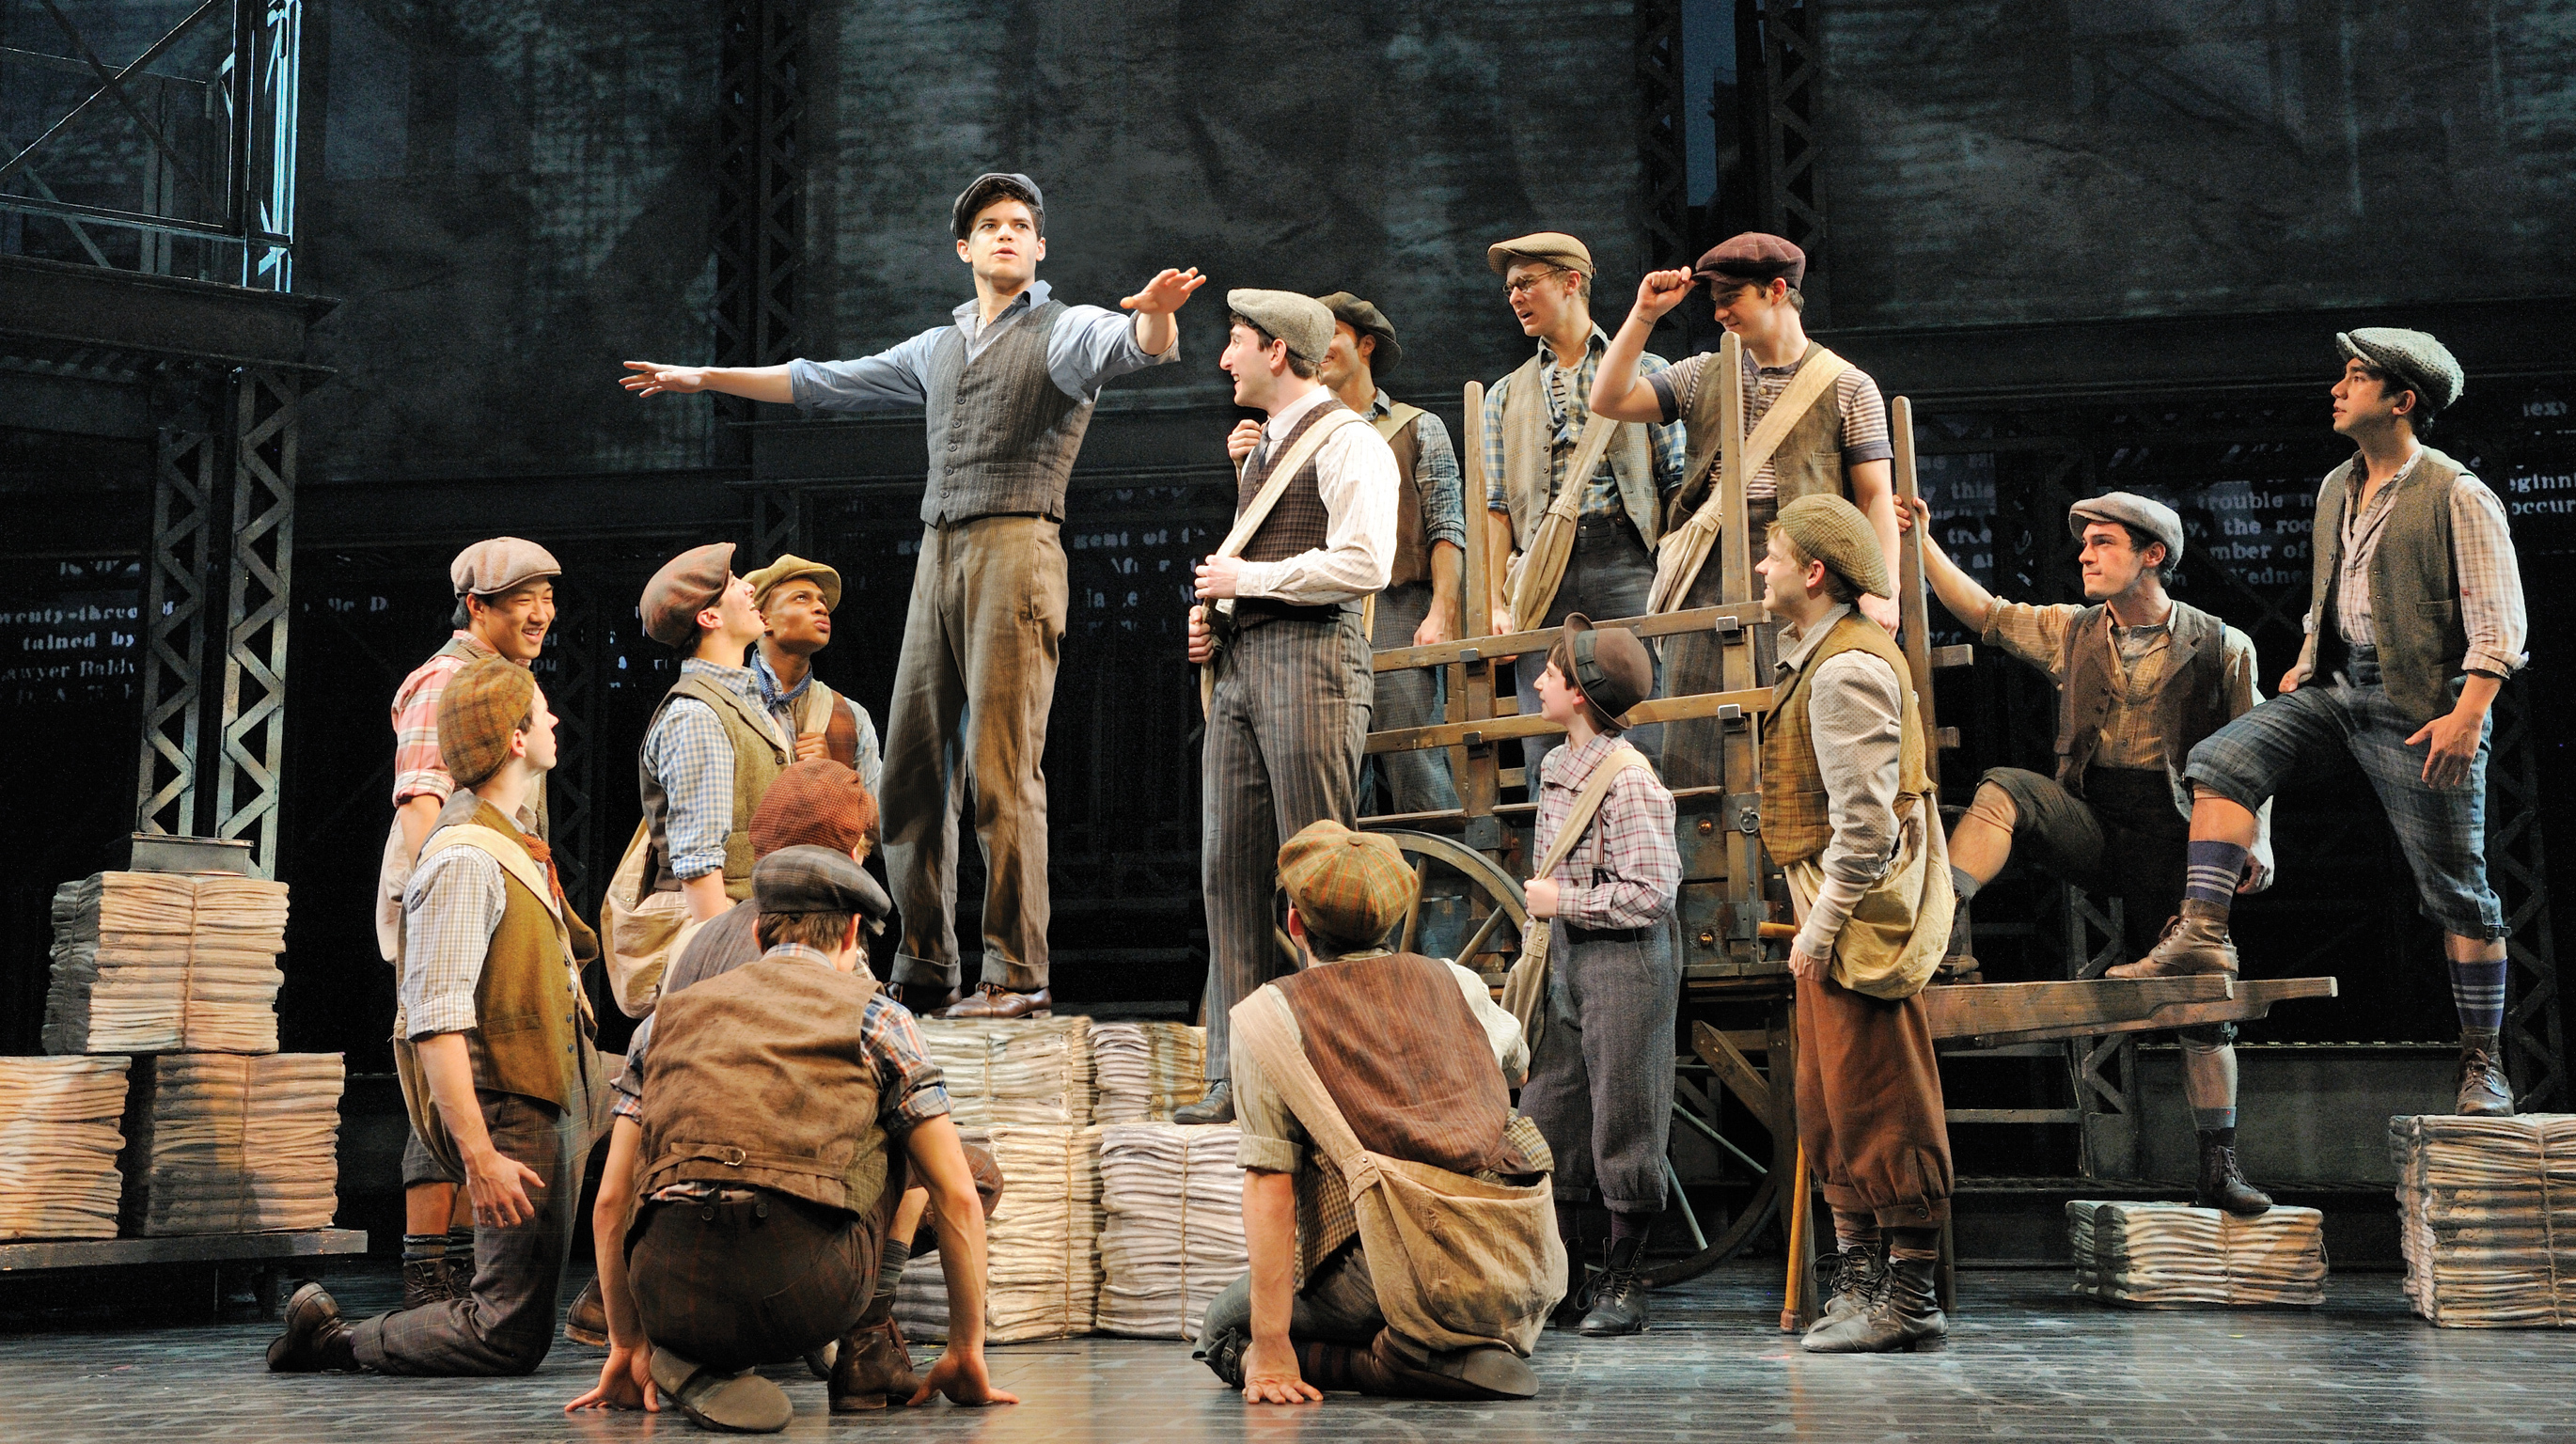 The Full Broadway Musical Newsies Is Free For One Night